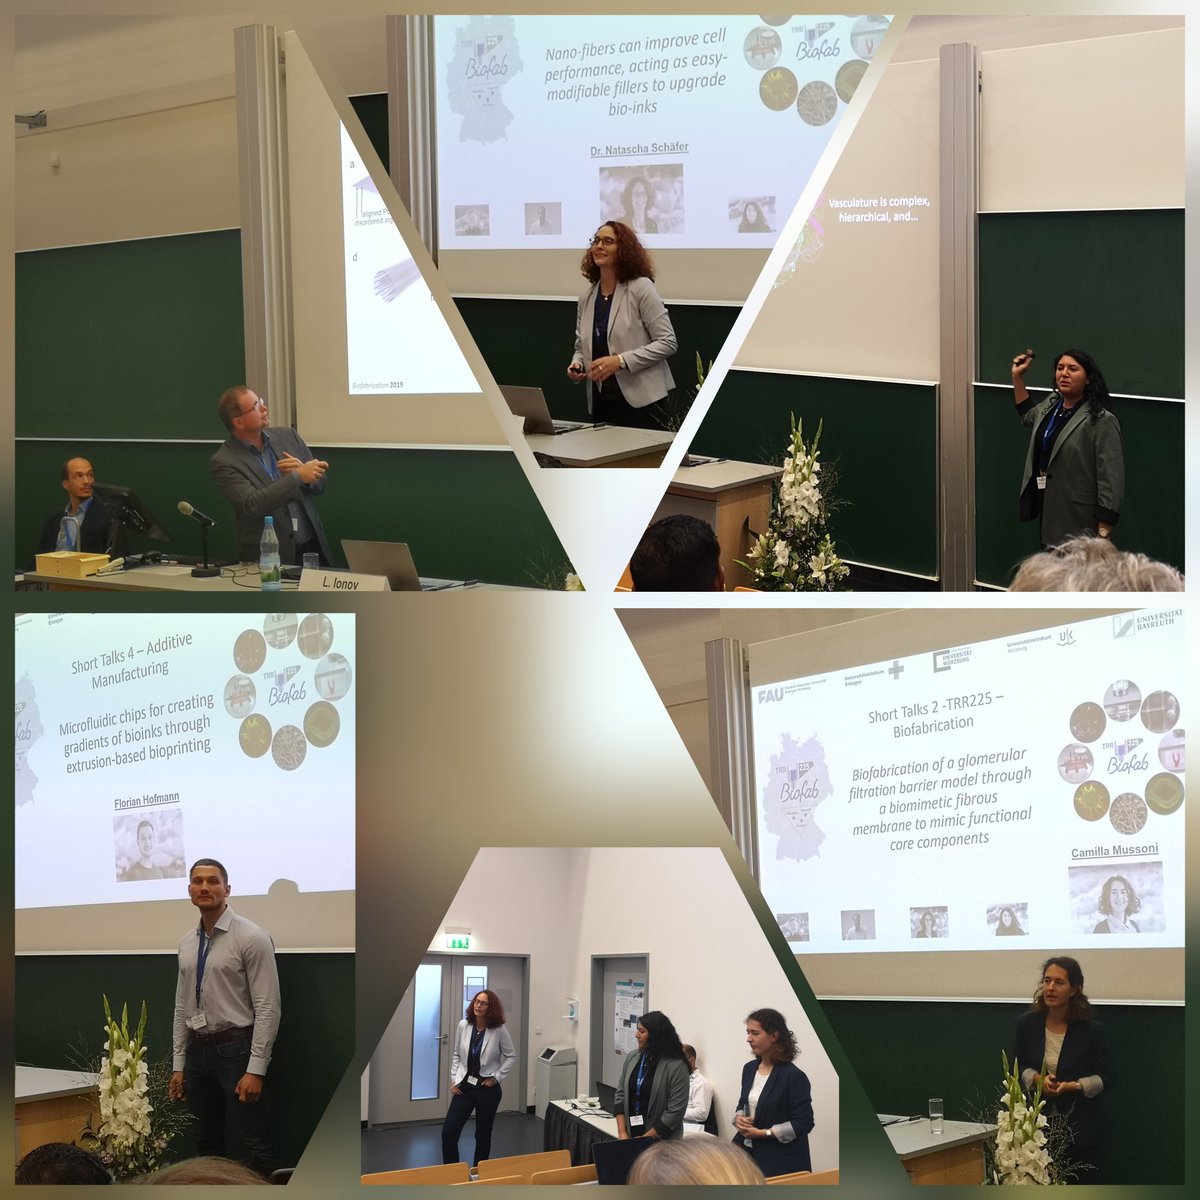 Buzzing with excitement at the #DGBM conference in Jena! @SFB_TRR225 members @nathaly_chicaiz, @CamillaMussoni, Natascha Schaefer, @IonovLab,  and Florian Hofamnn are all delivering captivating presentations on groundbreaking research. 🌟 #ResearchExcellence'